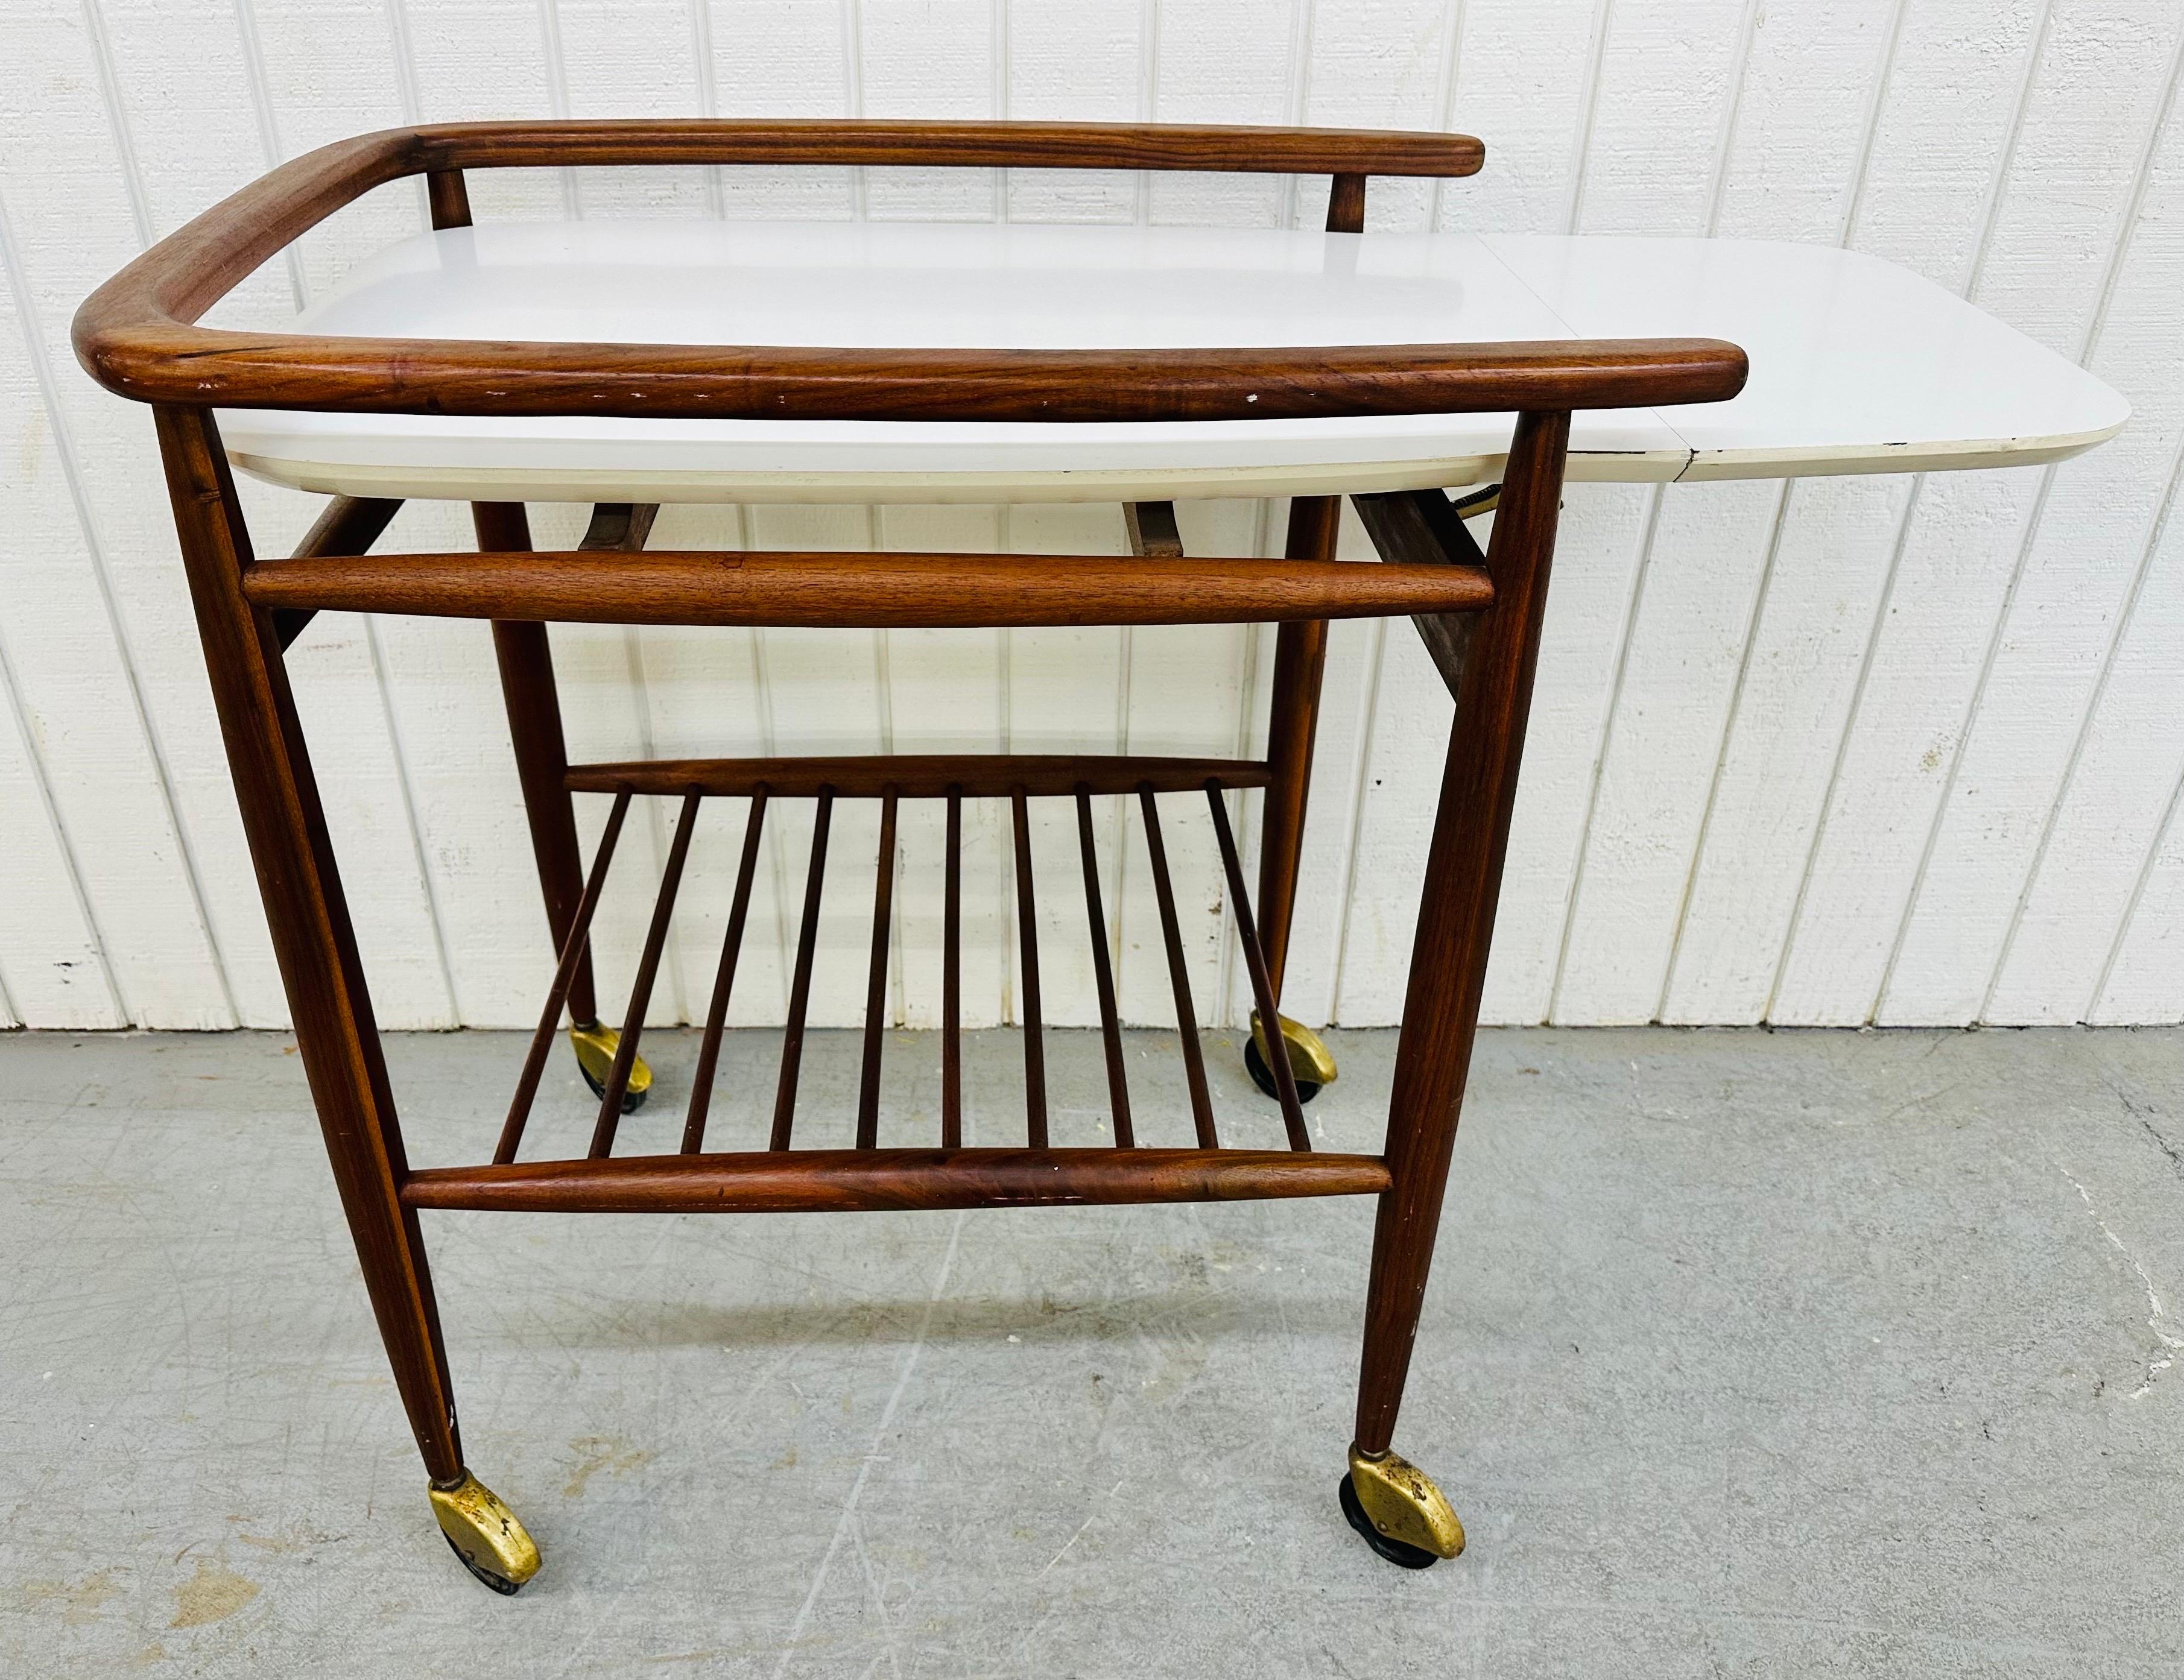 This listing is for a Mid-Century Modern Walnut Bar Cart. Featuring a white laminated serving top, a walnut frame with bottom shelf, and original wheels. This is an exceptional combination of quality and design by Arthur Umanoff!